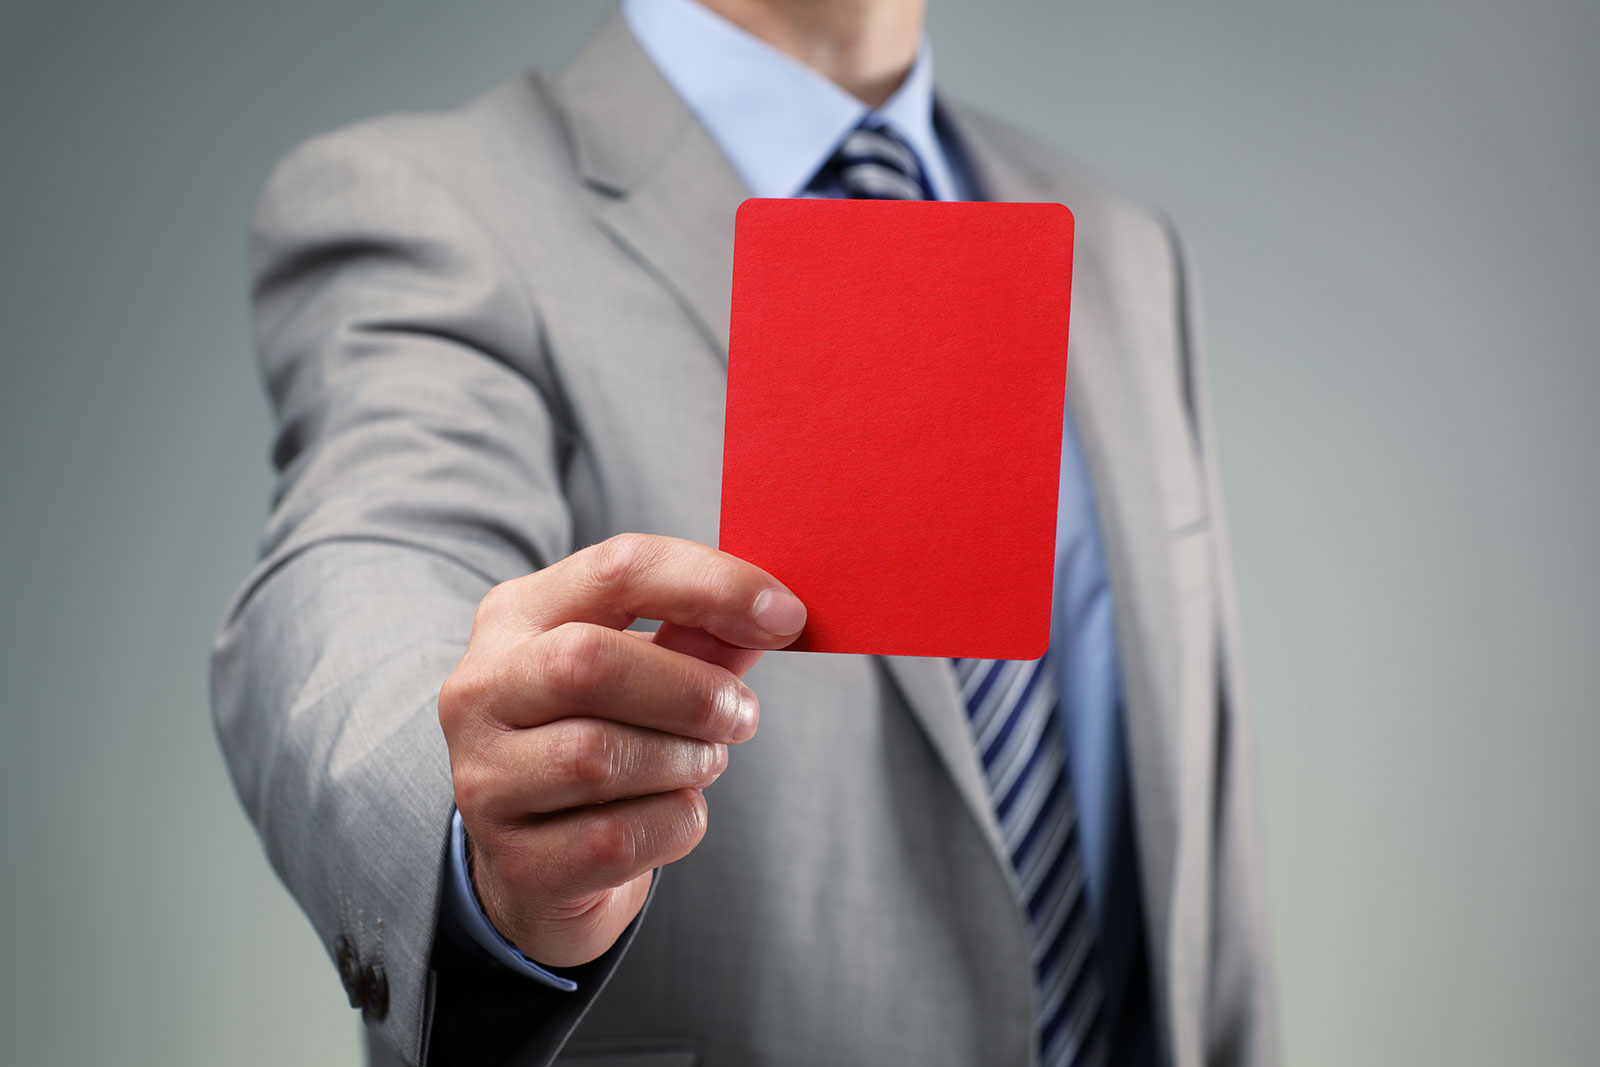 Man in suit holding a red card